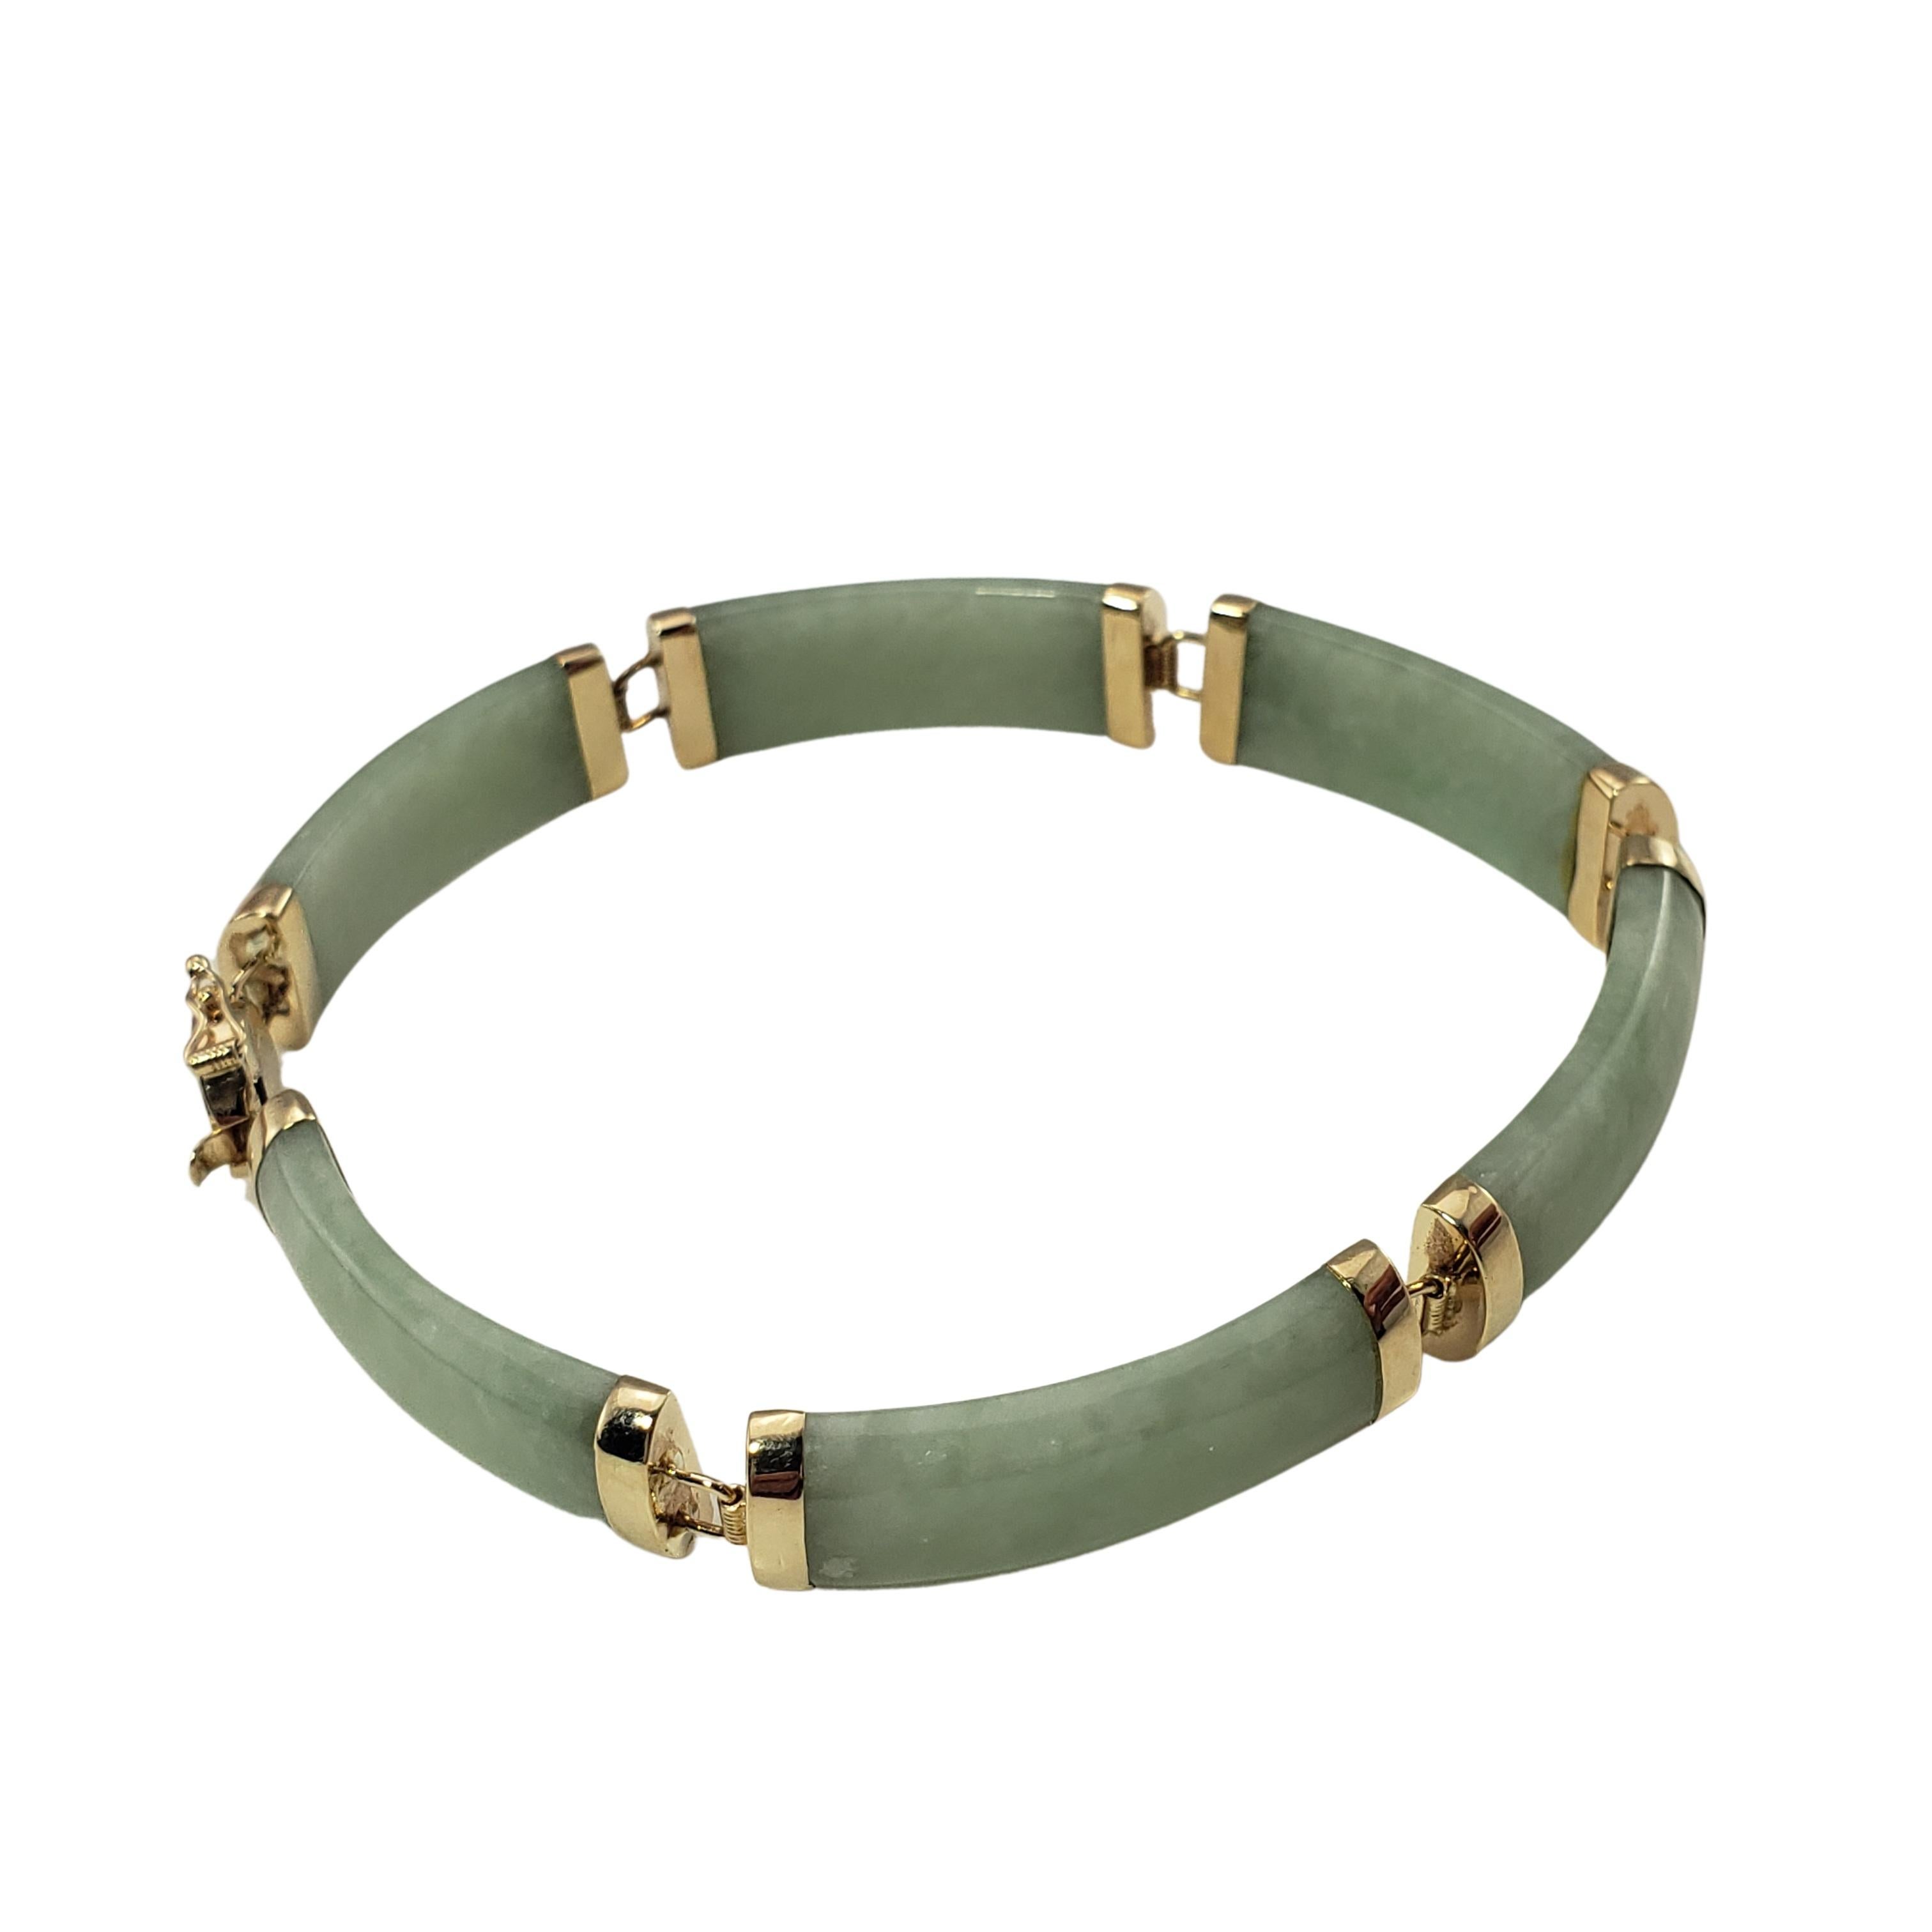 14 Karat Yellow Gold and Jade Bracelet-

This lovely jade bracelet is accented with beautifully detailed 14K yellow gold.  Width:  8 mm.  

Size:  6.5 inches

Weight:   8.7 dwt. /  13.6 gr.

Stamped: 14K  585

Very good condition, professionally